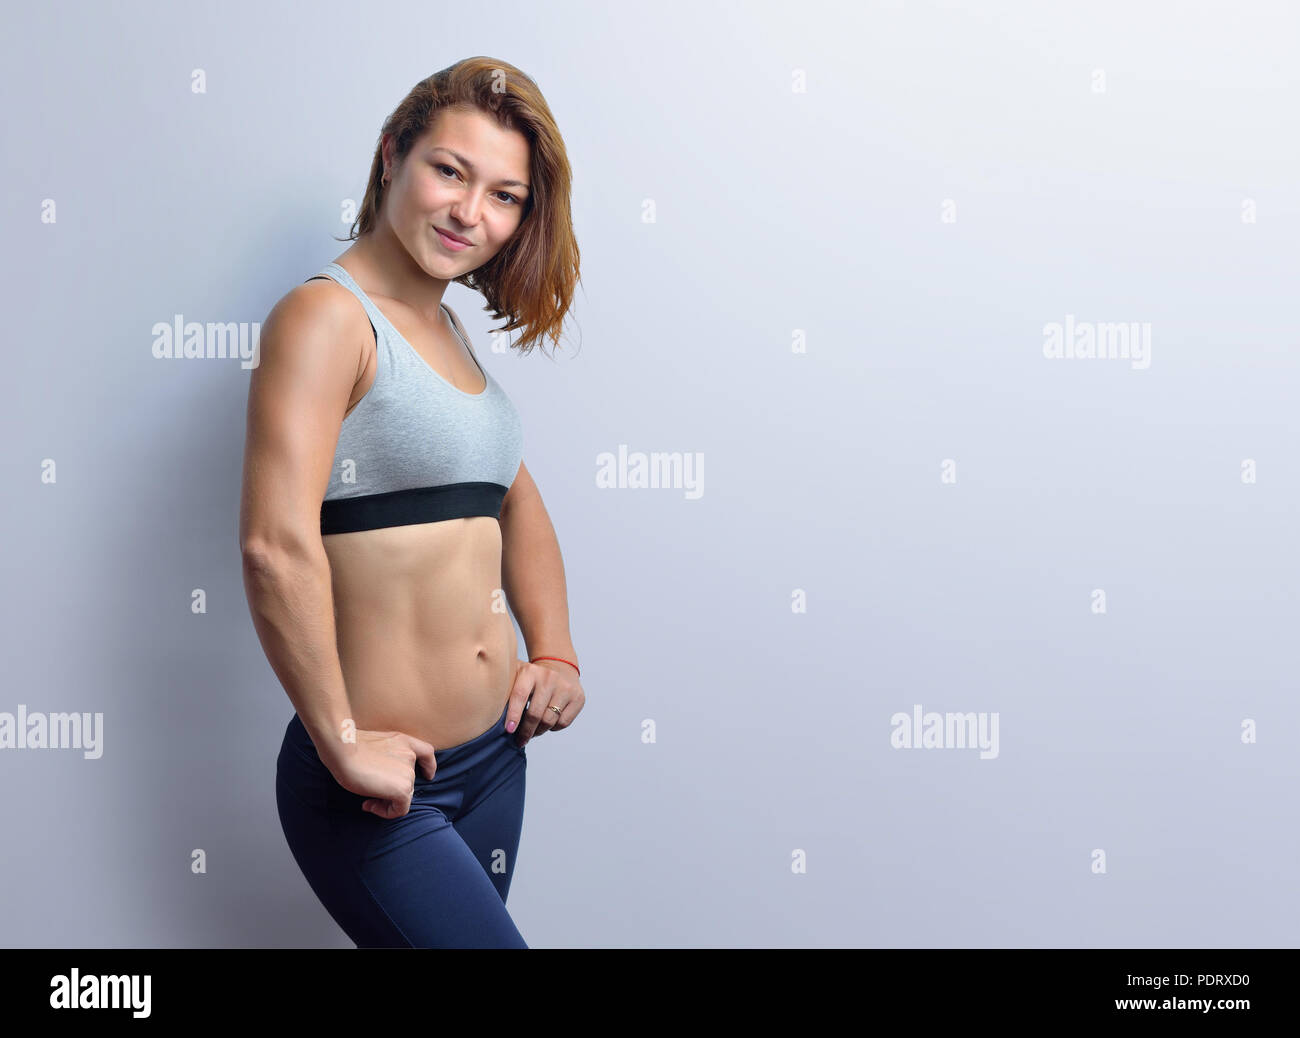 Female fitness coach showing muscles in a grey top and black leggings isolated on a white background. Stock Photo